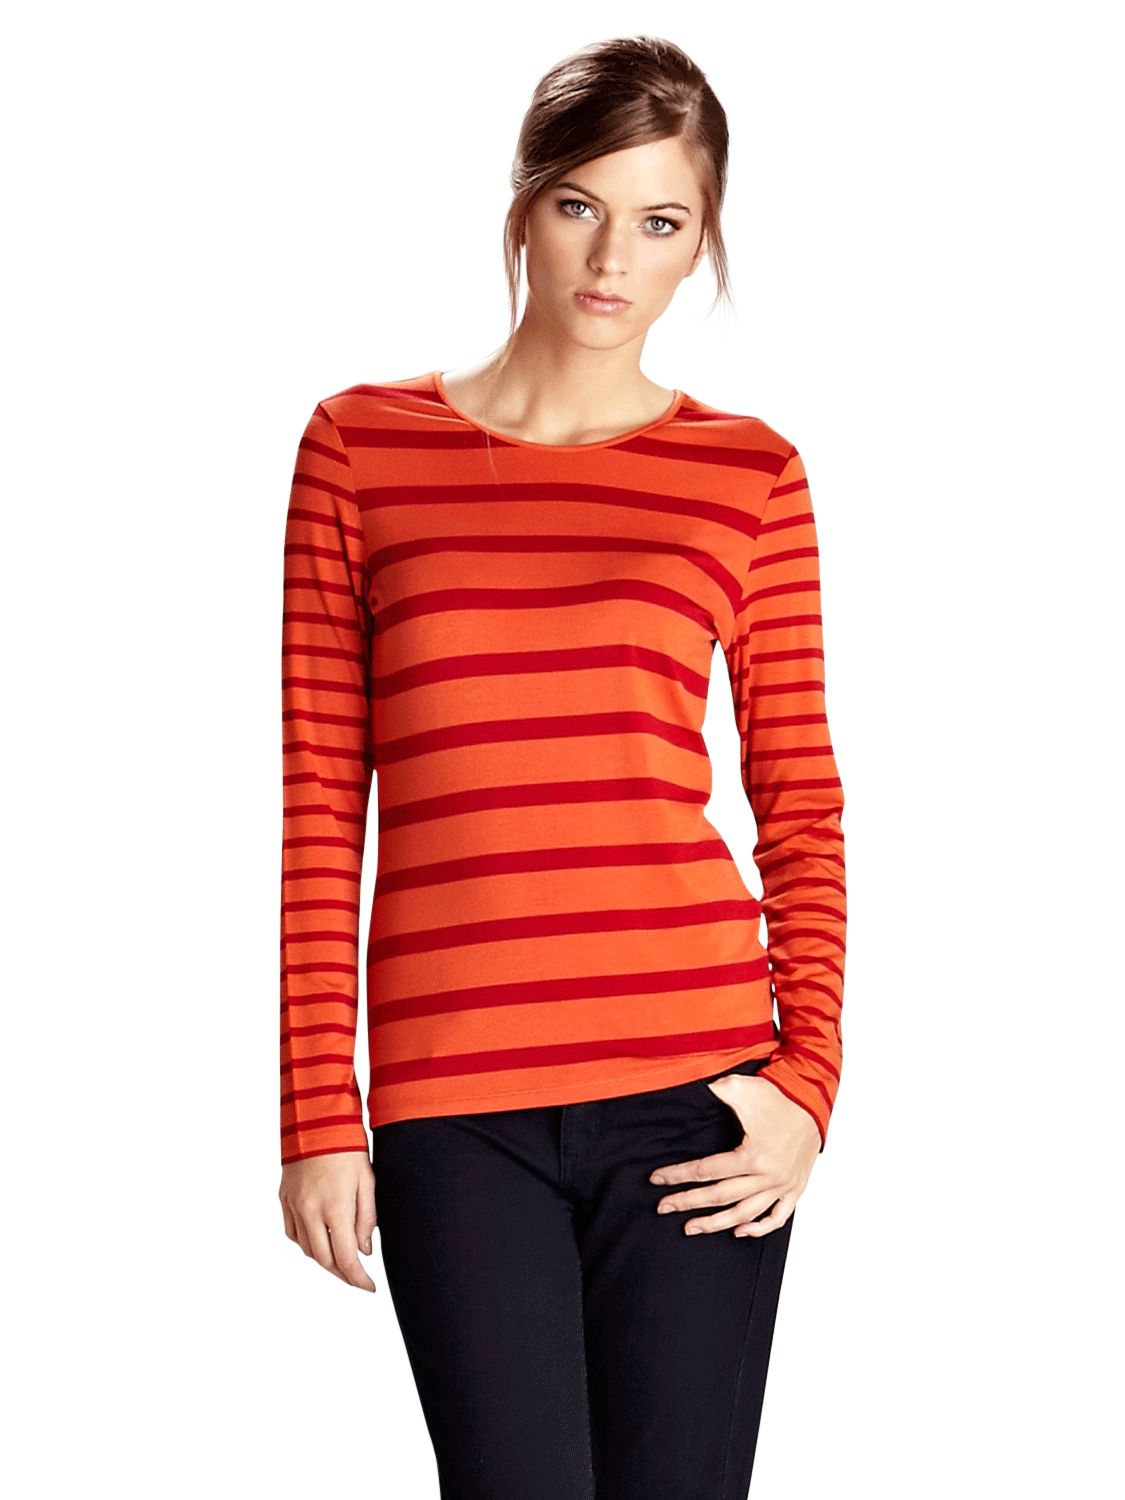 Oasis Stripe Long Sleeve T-Shirt, Red